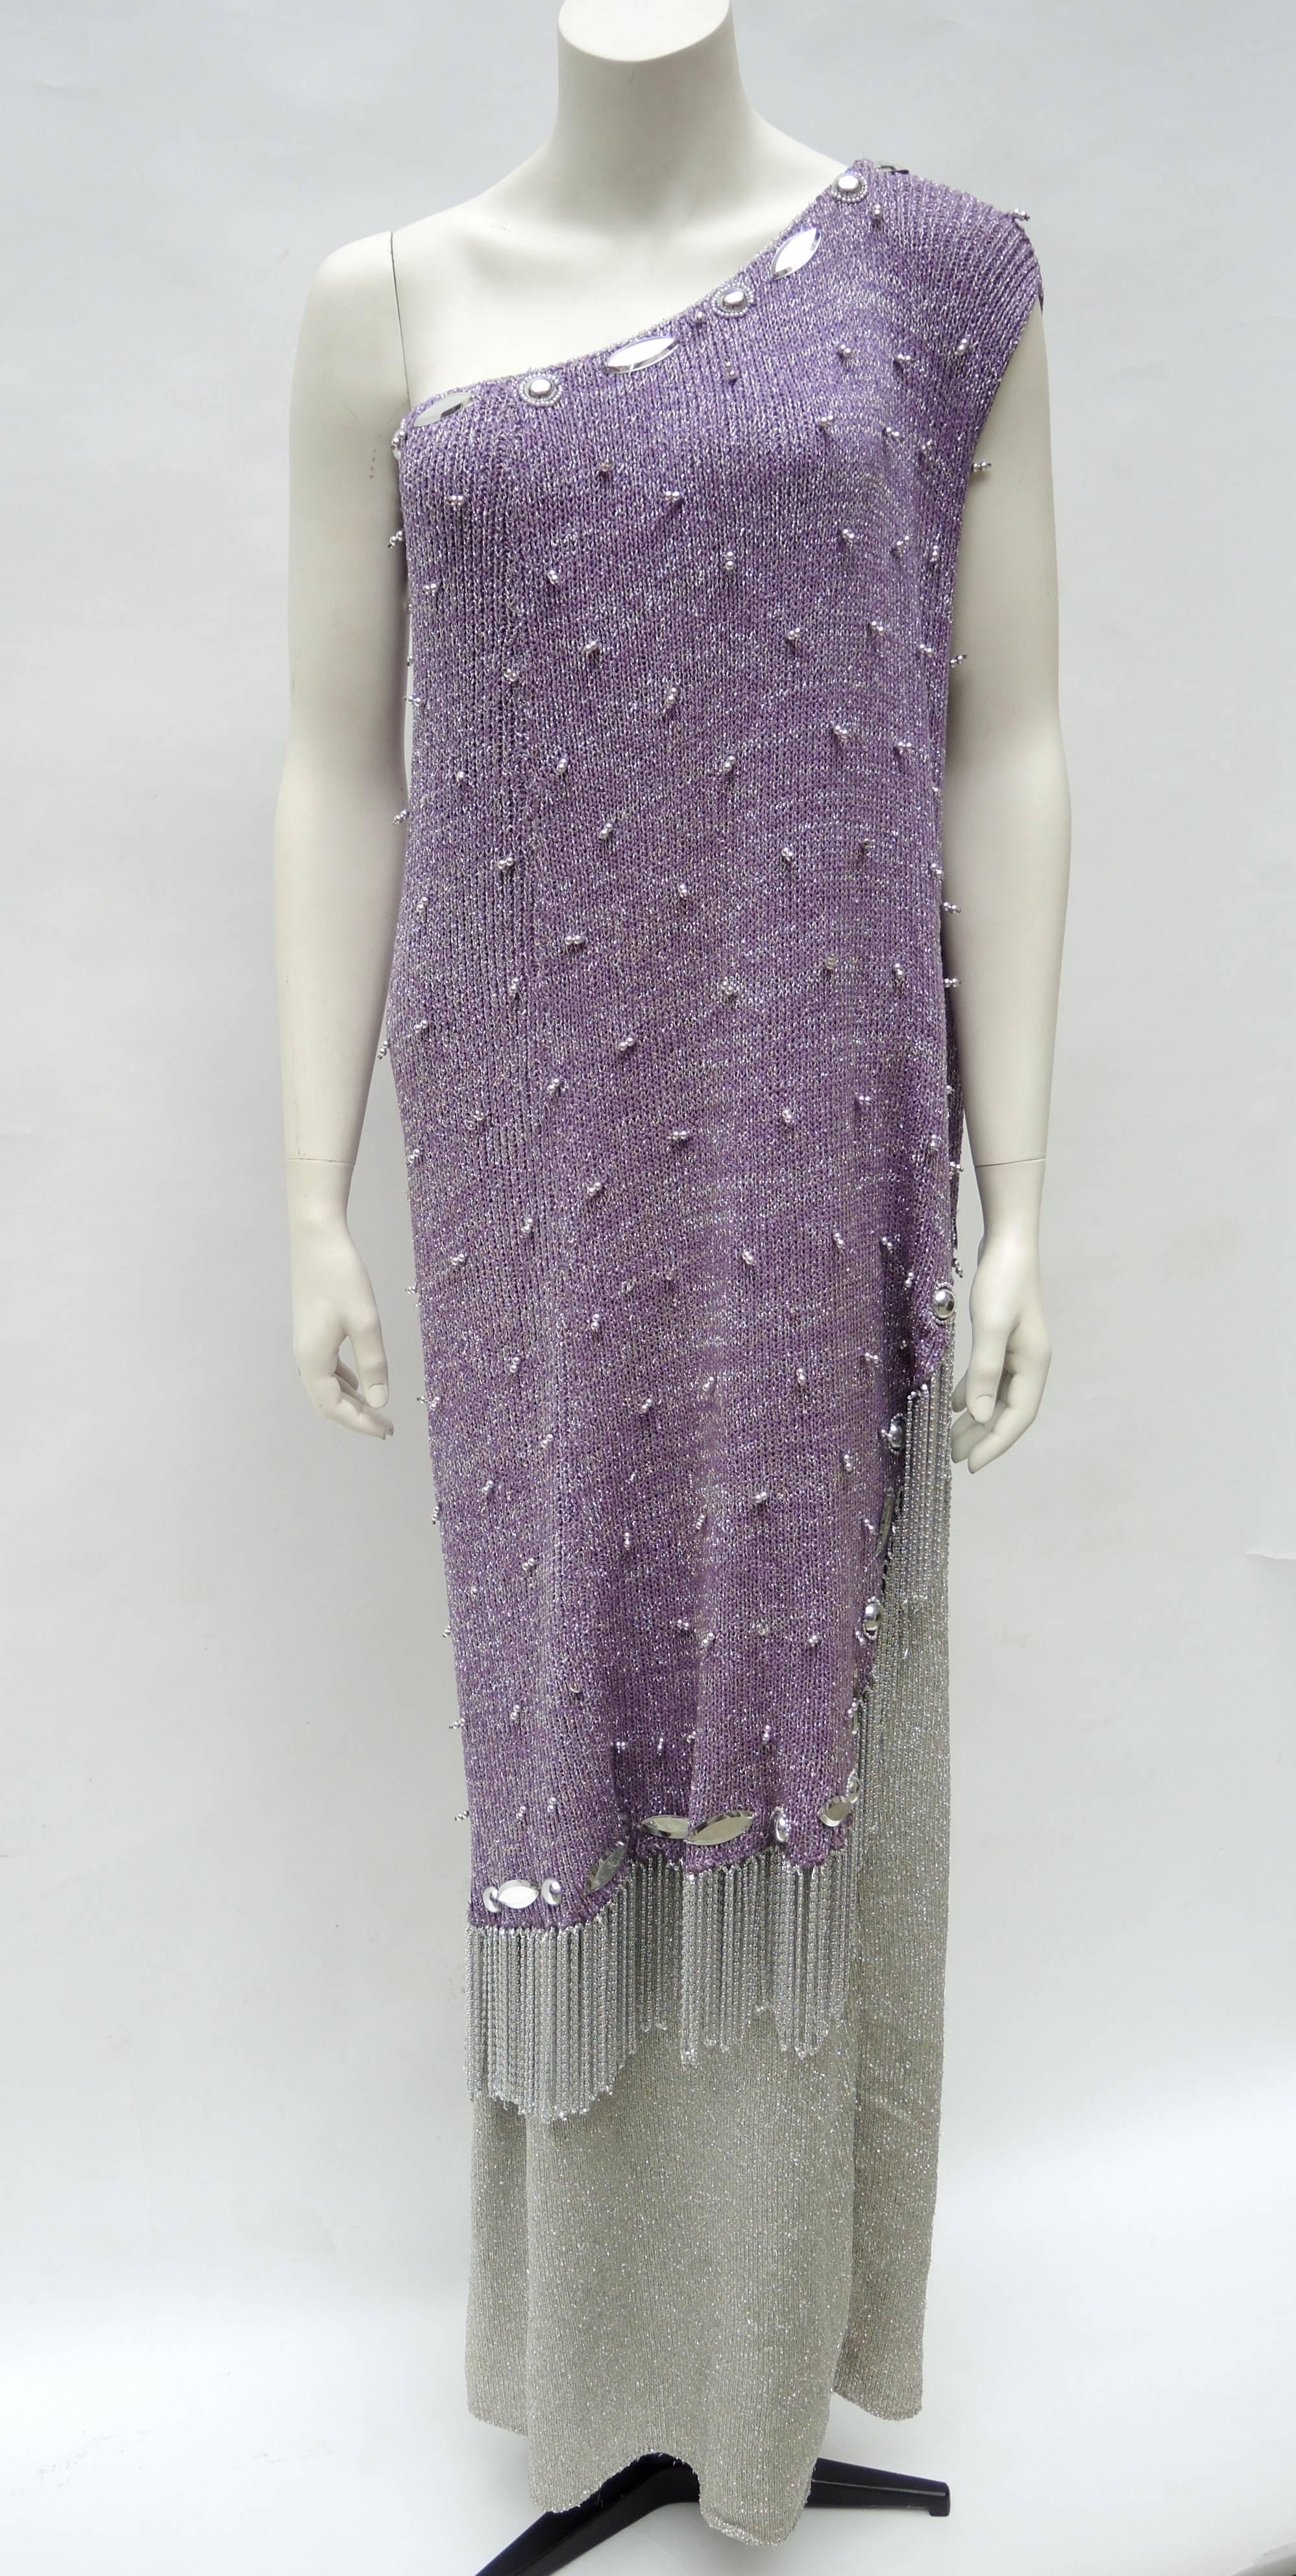 A rare and stunning dress made by the legendary socialite designer of the 1970's Adolfo. The 1970's red carpet worthy knitted purple and silver one shoulder gown is made in two layers ;the top knitted purple and silver layer is sewn with silver